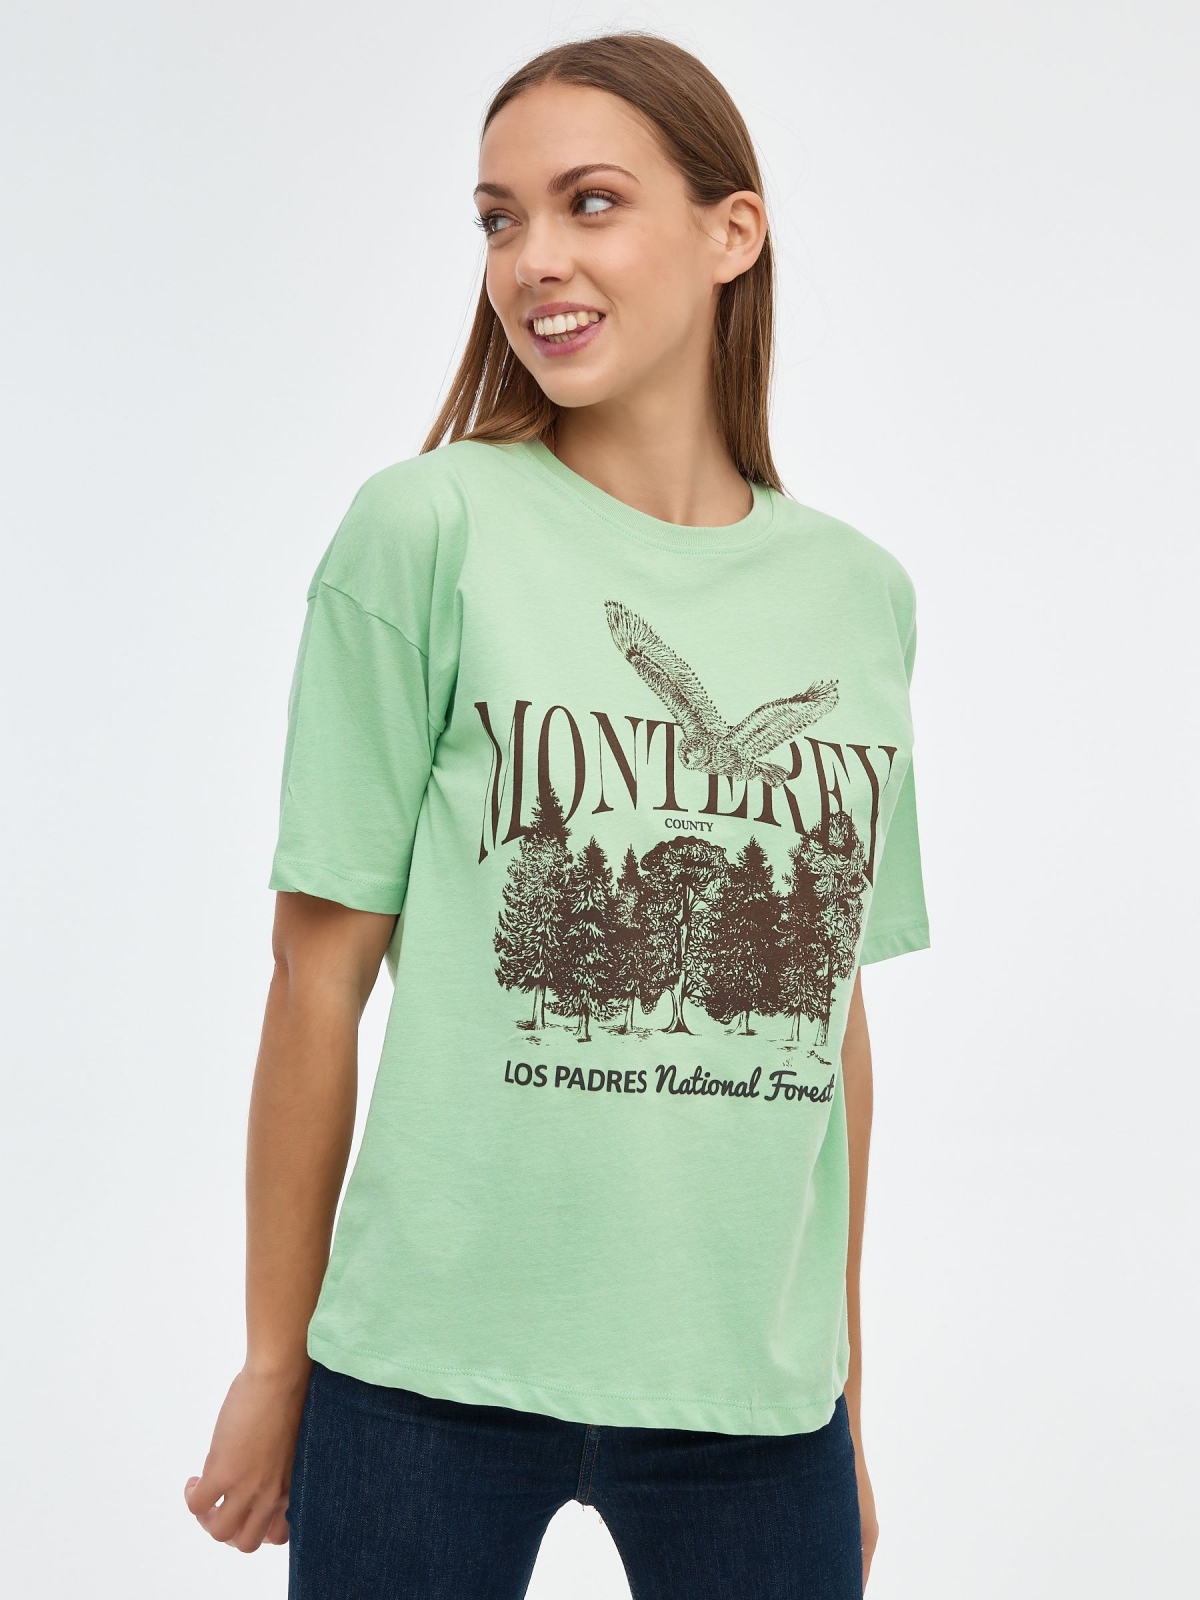 Monterey T-shirt light green middle front view